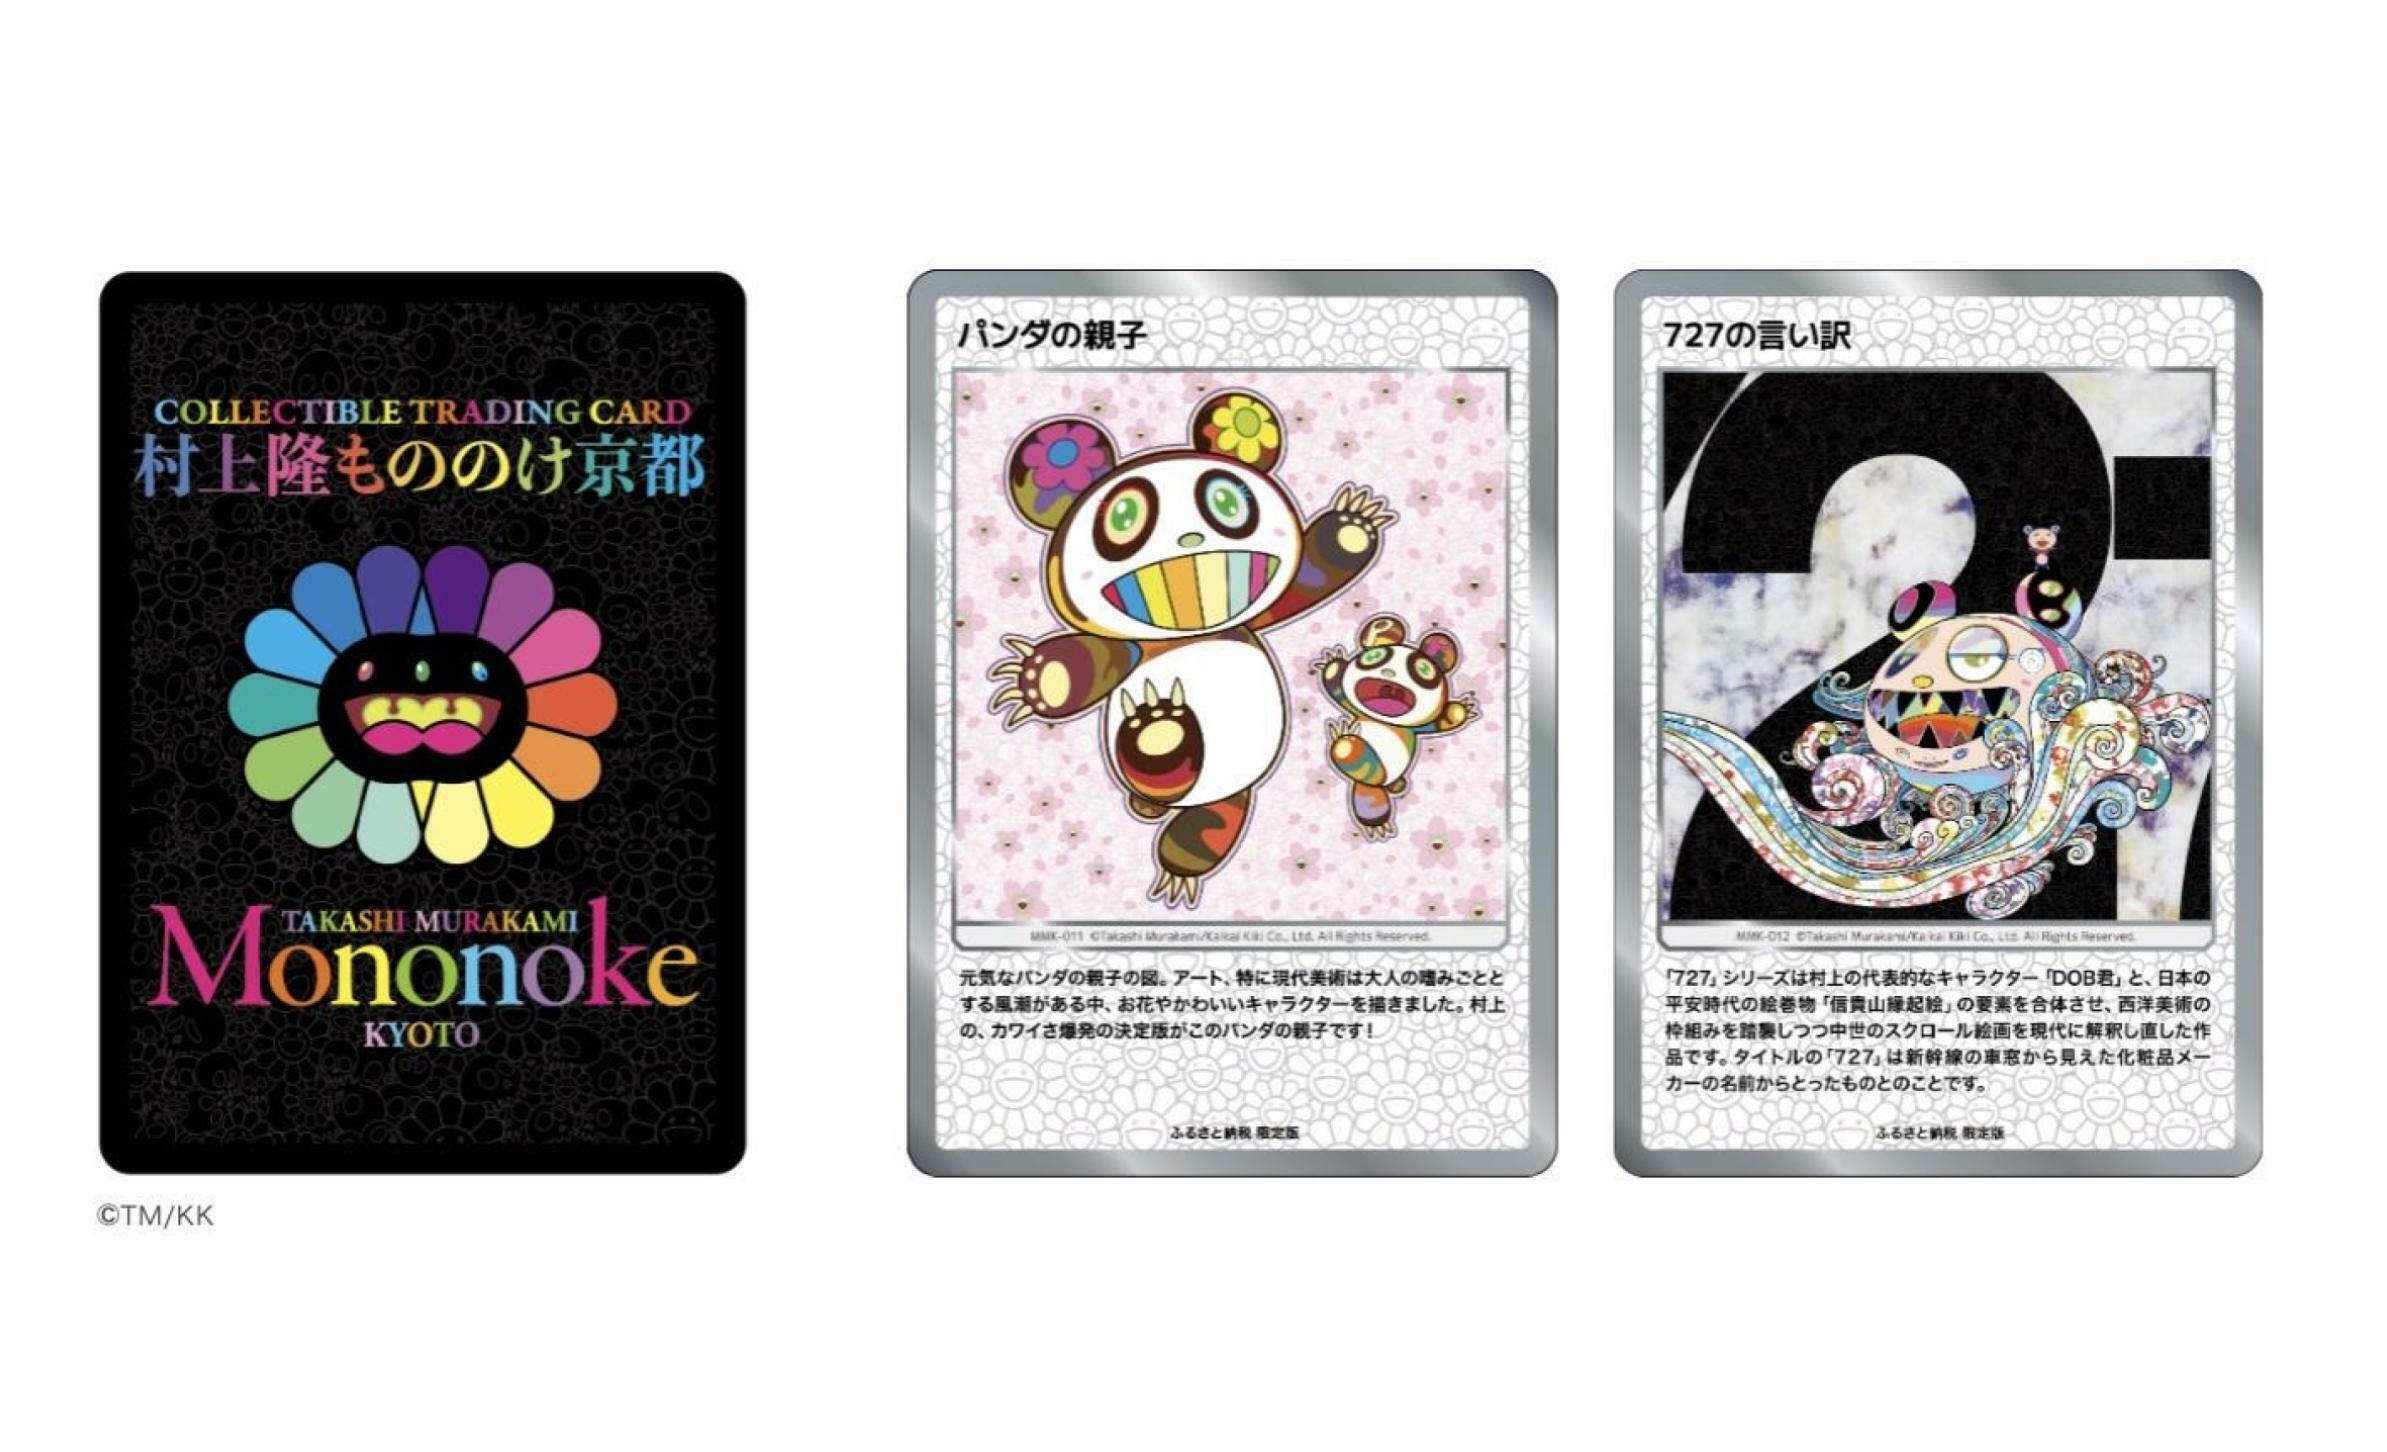 Exclusive Takashi Murakami merch available for Japan taxpayers